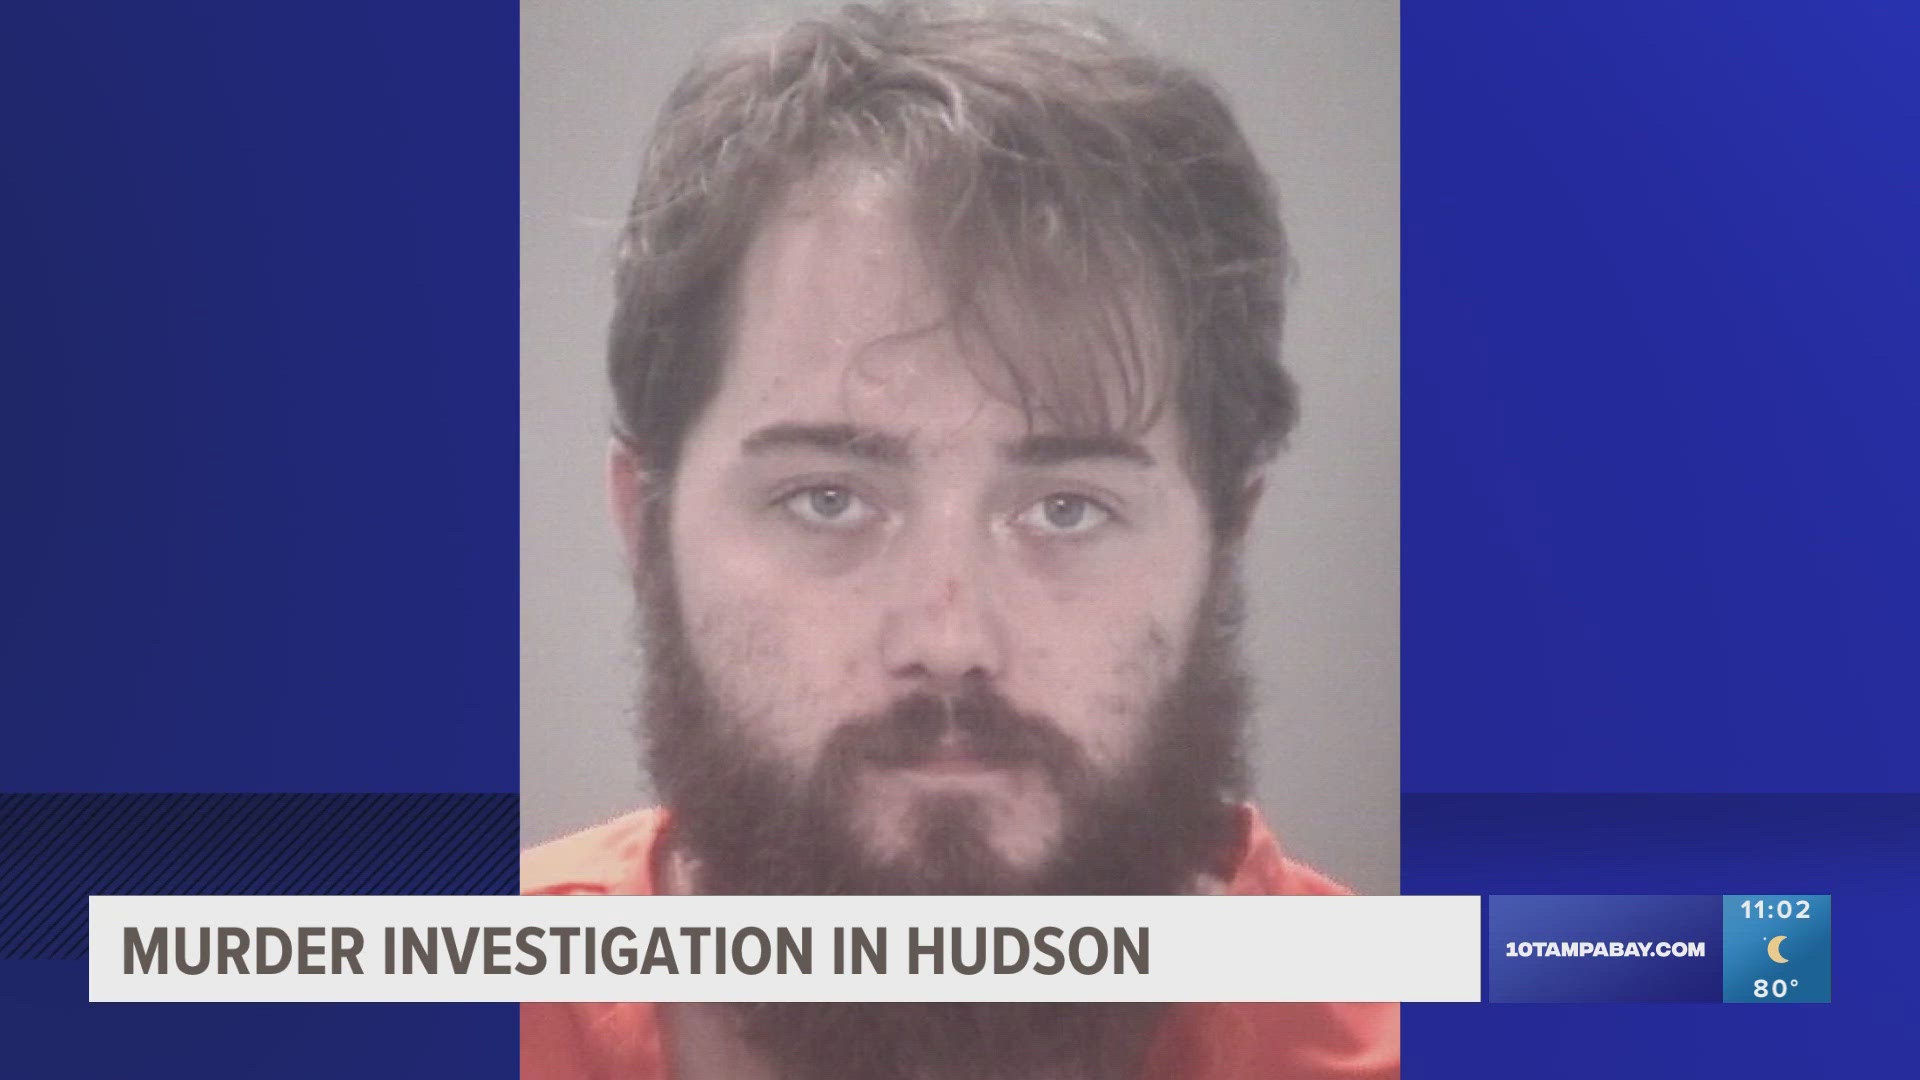 Deputies found human remains while searching for a missing and endangered Hudson family Saturday. The suspect, Rory Atwood, is in police custody.